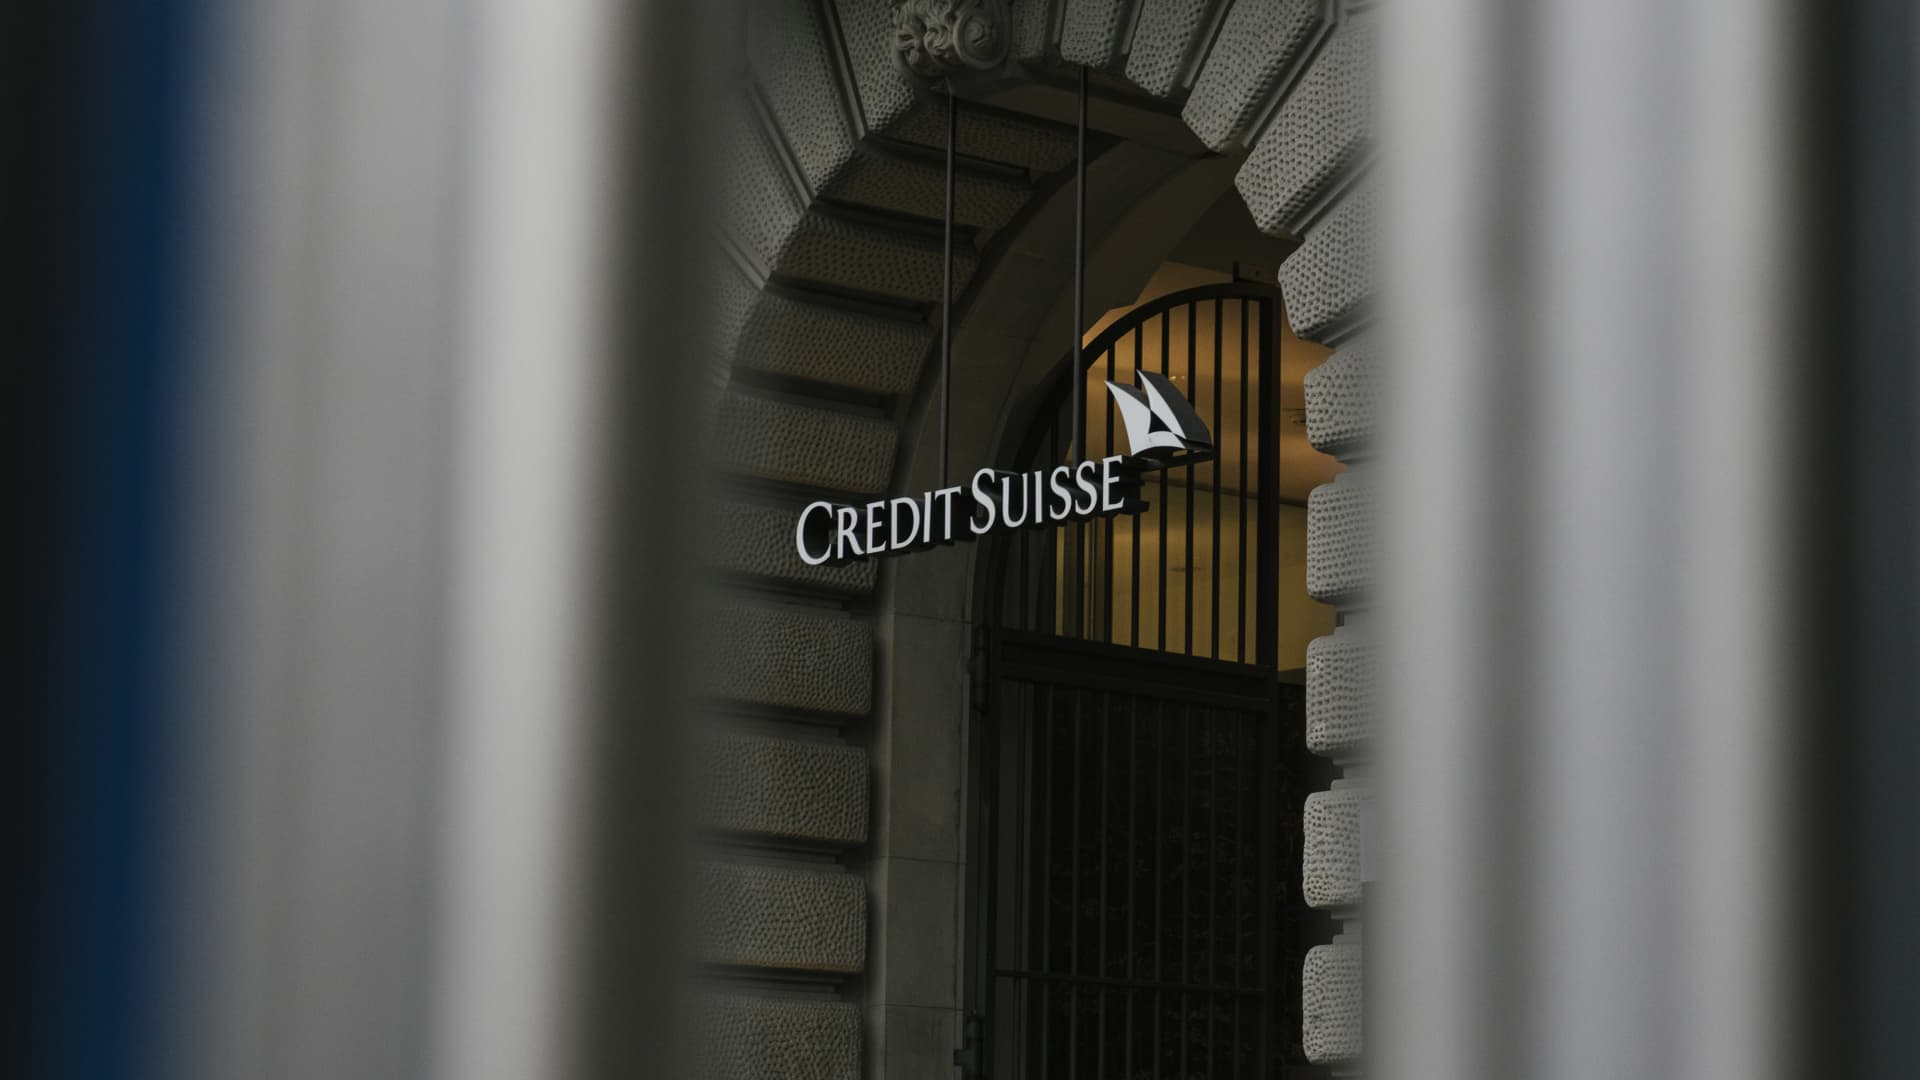 Credit Suisse chairman denies plans to sell or raise capital after mammoth loss